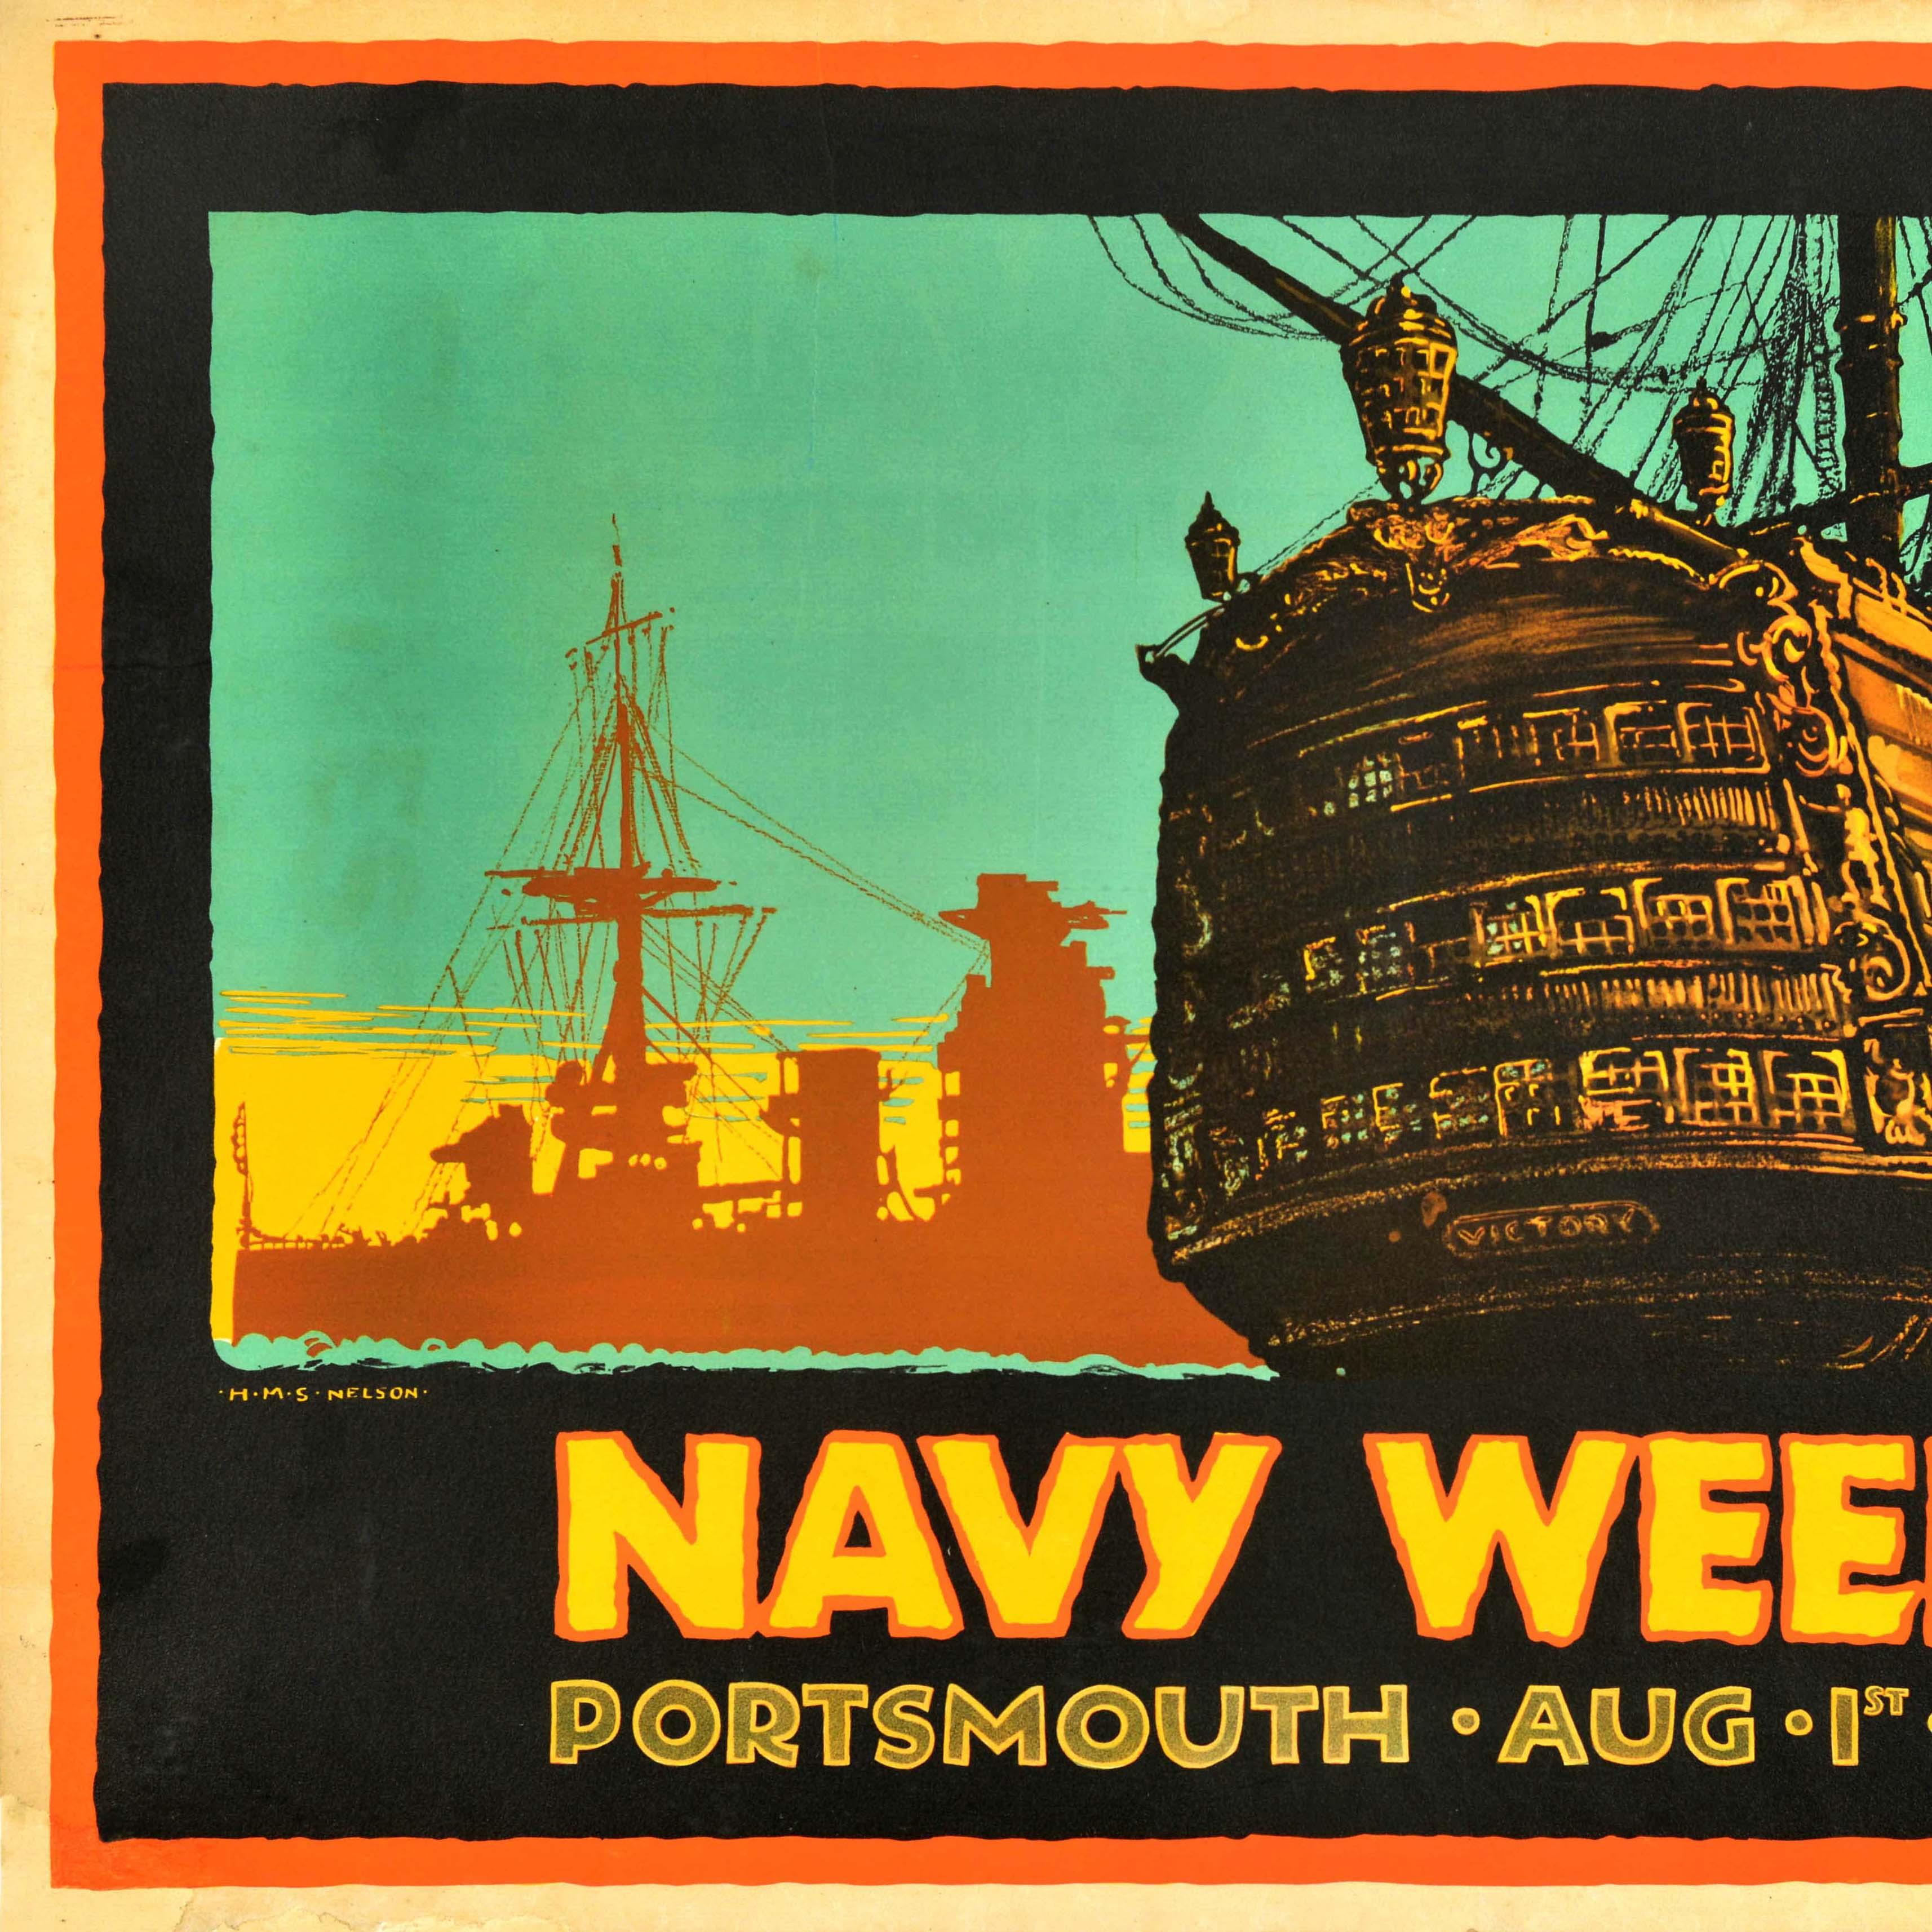 Original vintage maritime event advertising poster for the Navy Week Portsmouth 1-8 August featuring an illustration depicting the Royal Navy battleship HMS Nelson (launched 1925-decommissioned 1948) on the horizon with the Battle of Trafalgar